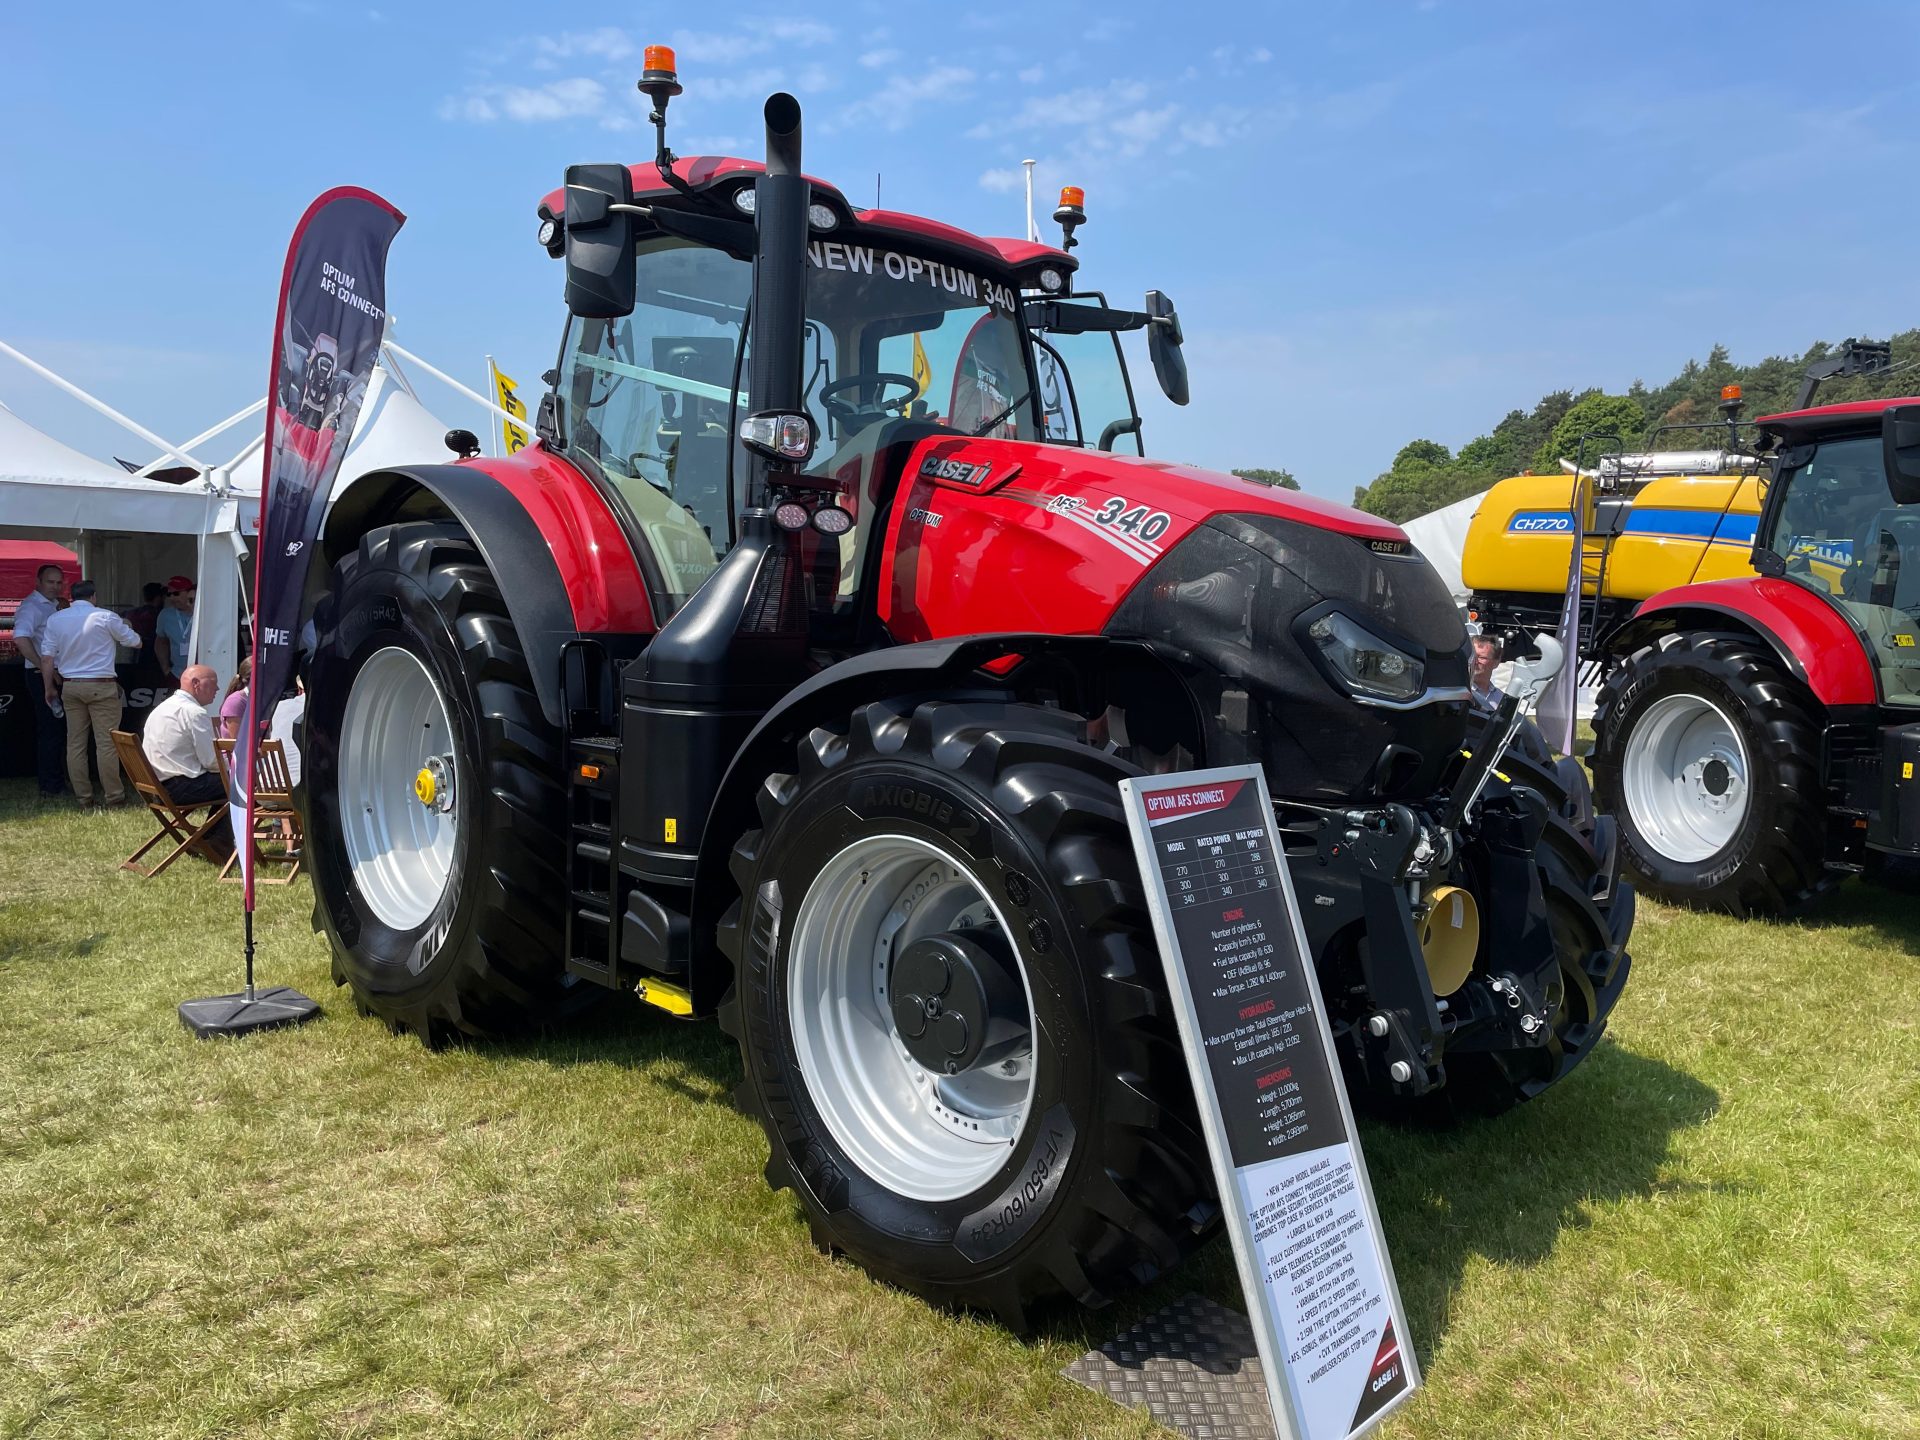 Cereals sees big Case IH and New Holland launch